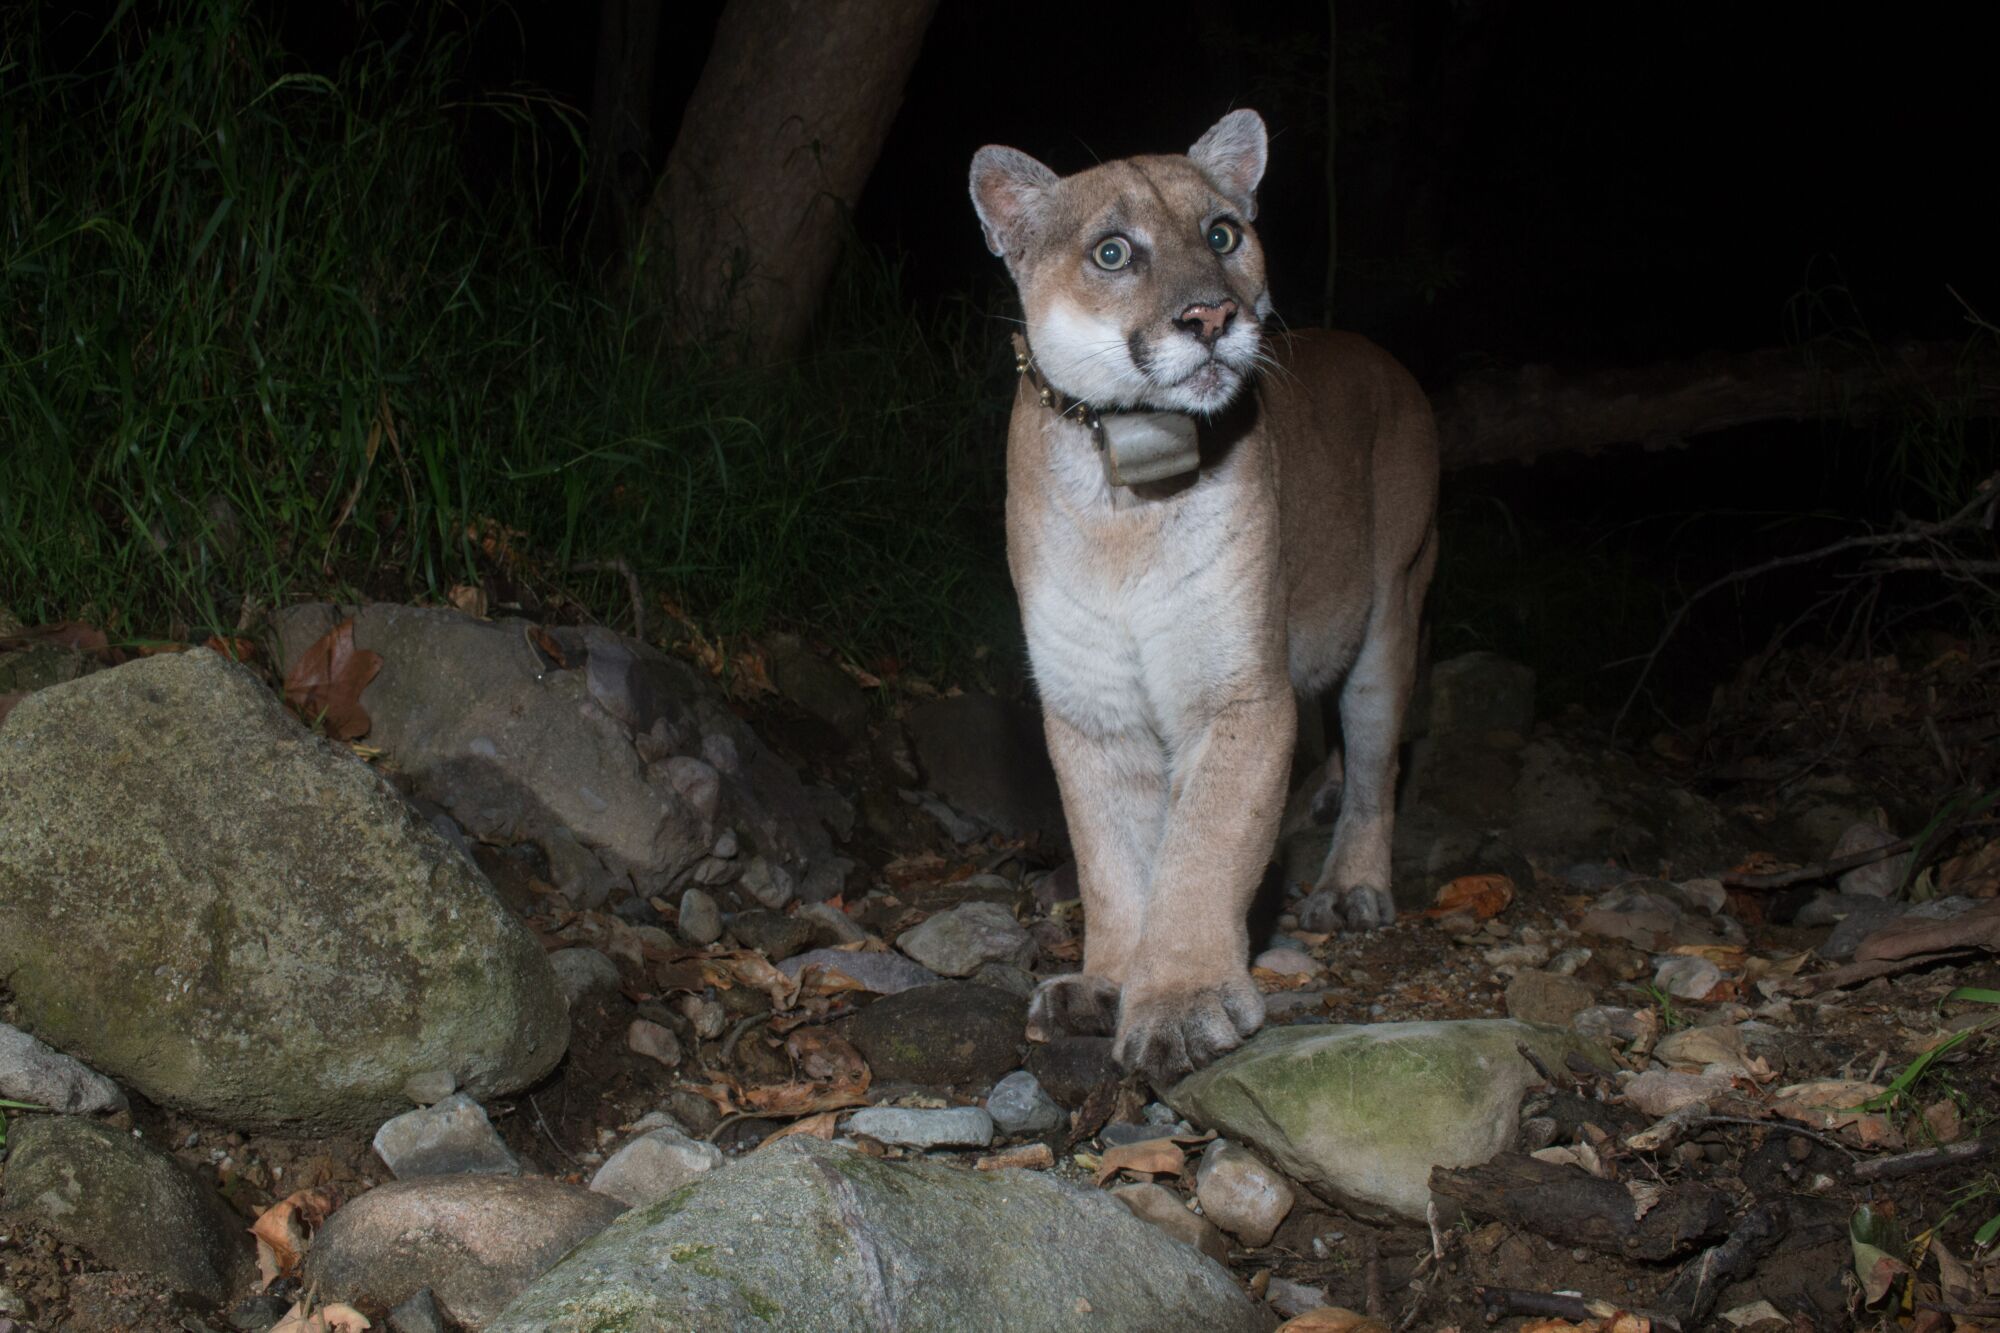 P-22 appears wary of the trail camera while walking outdoors at night.